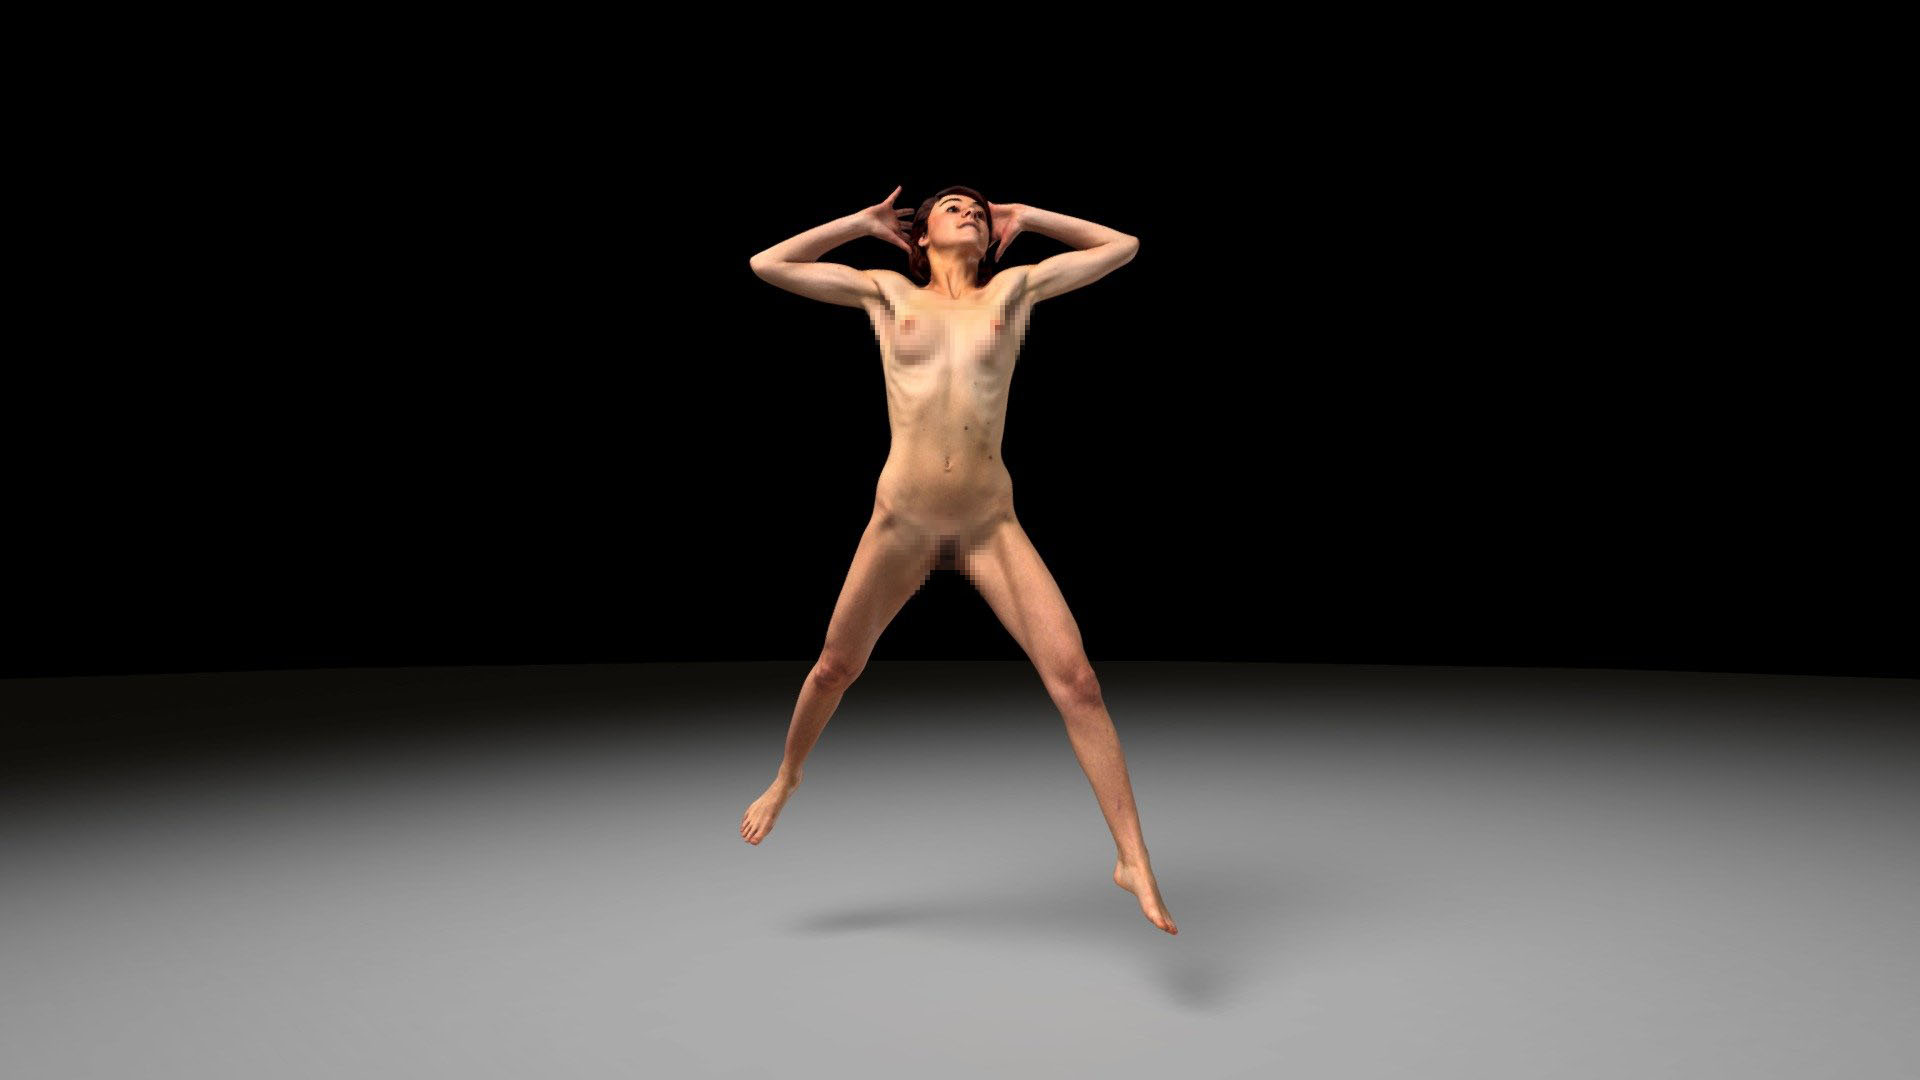 danae model freezed during a nude jump in the photostudio